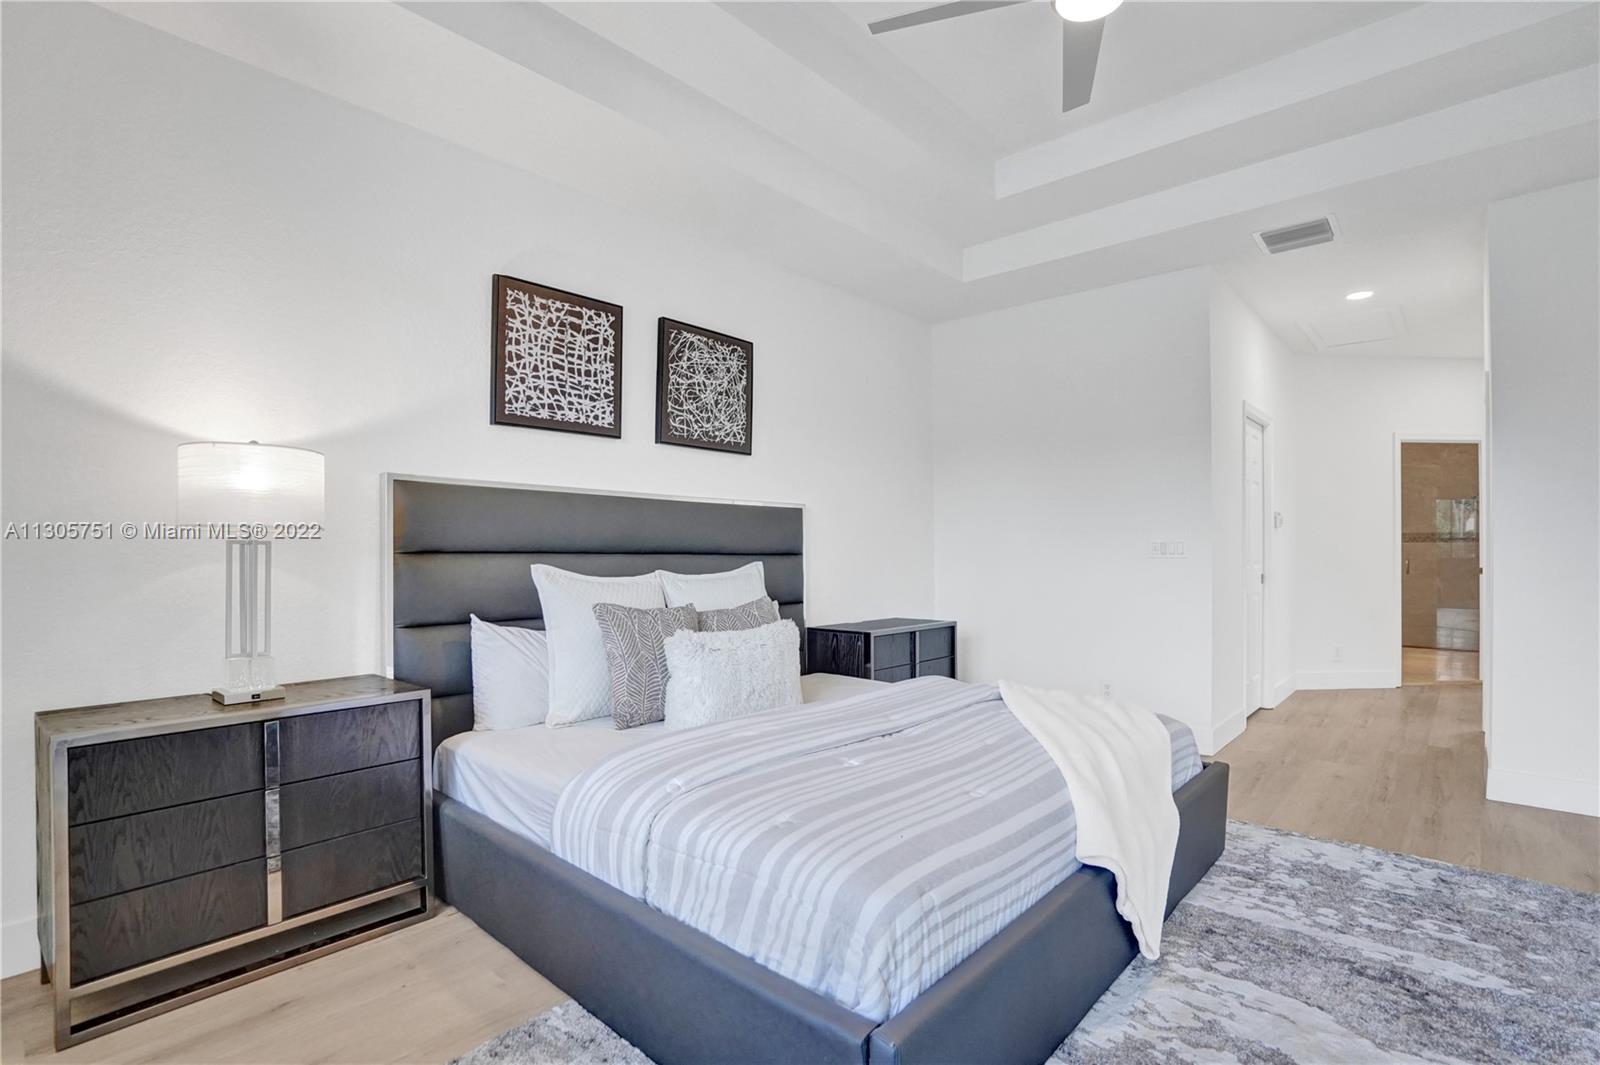 Master suite has two large walk-in closets and leads to upgraded master bathroom.